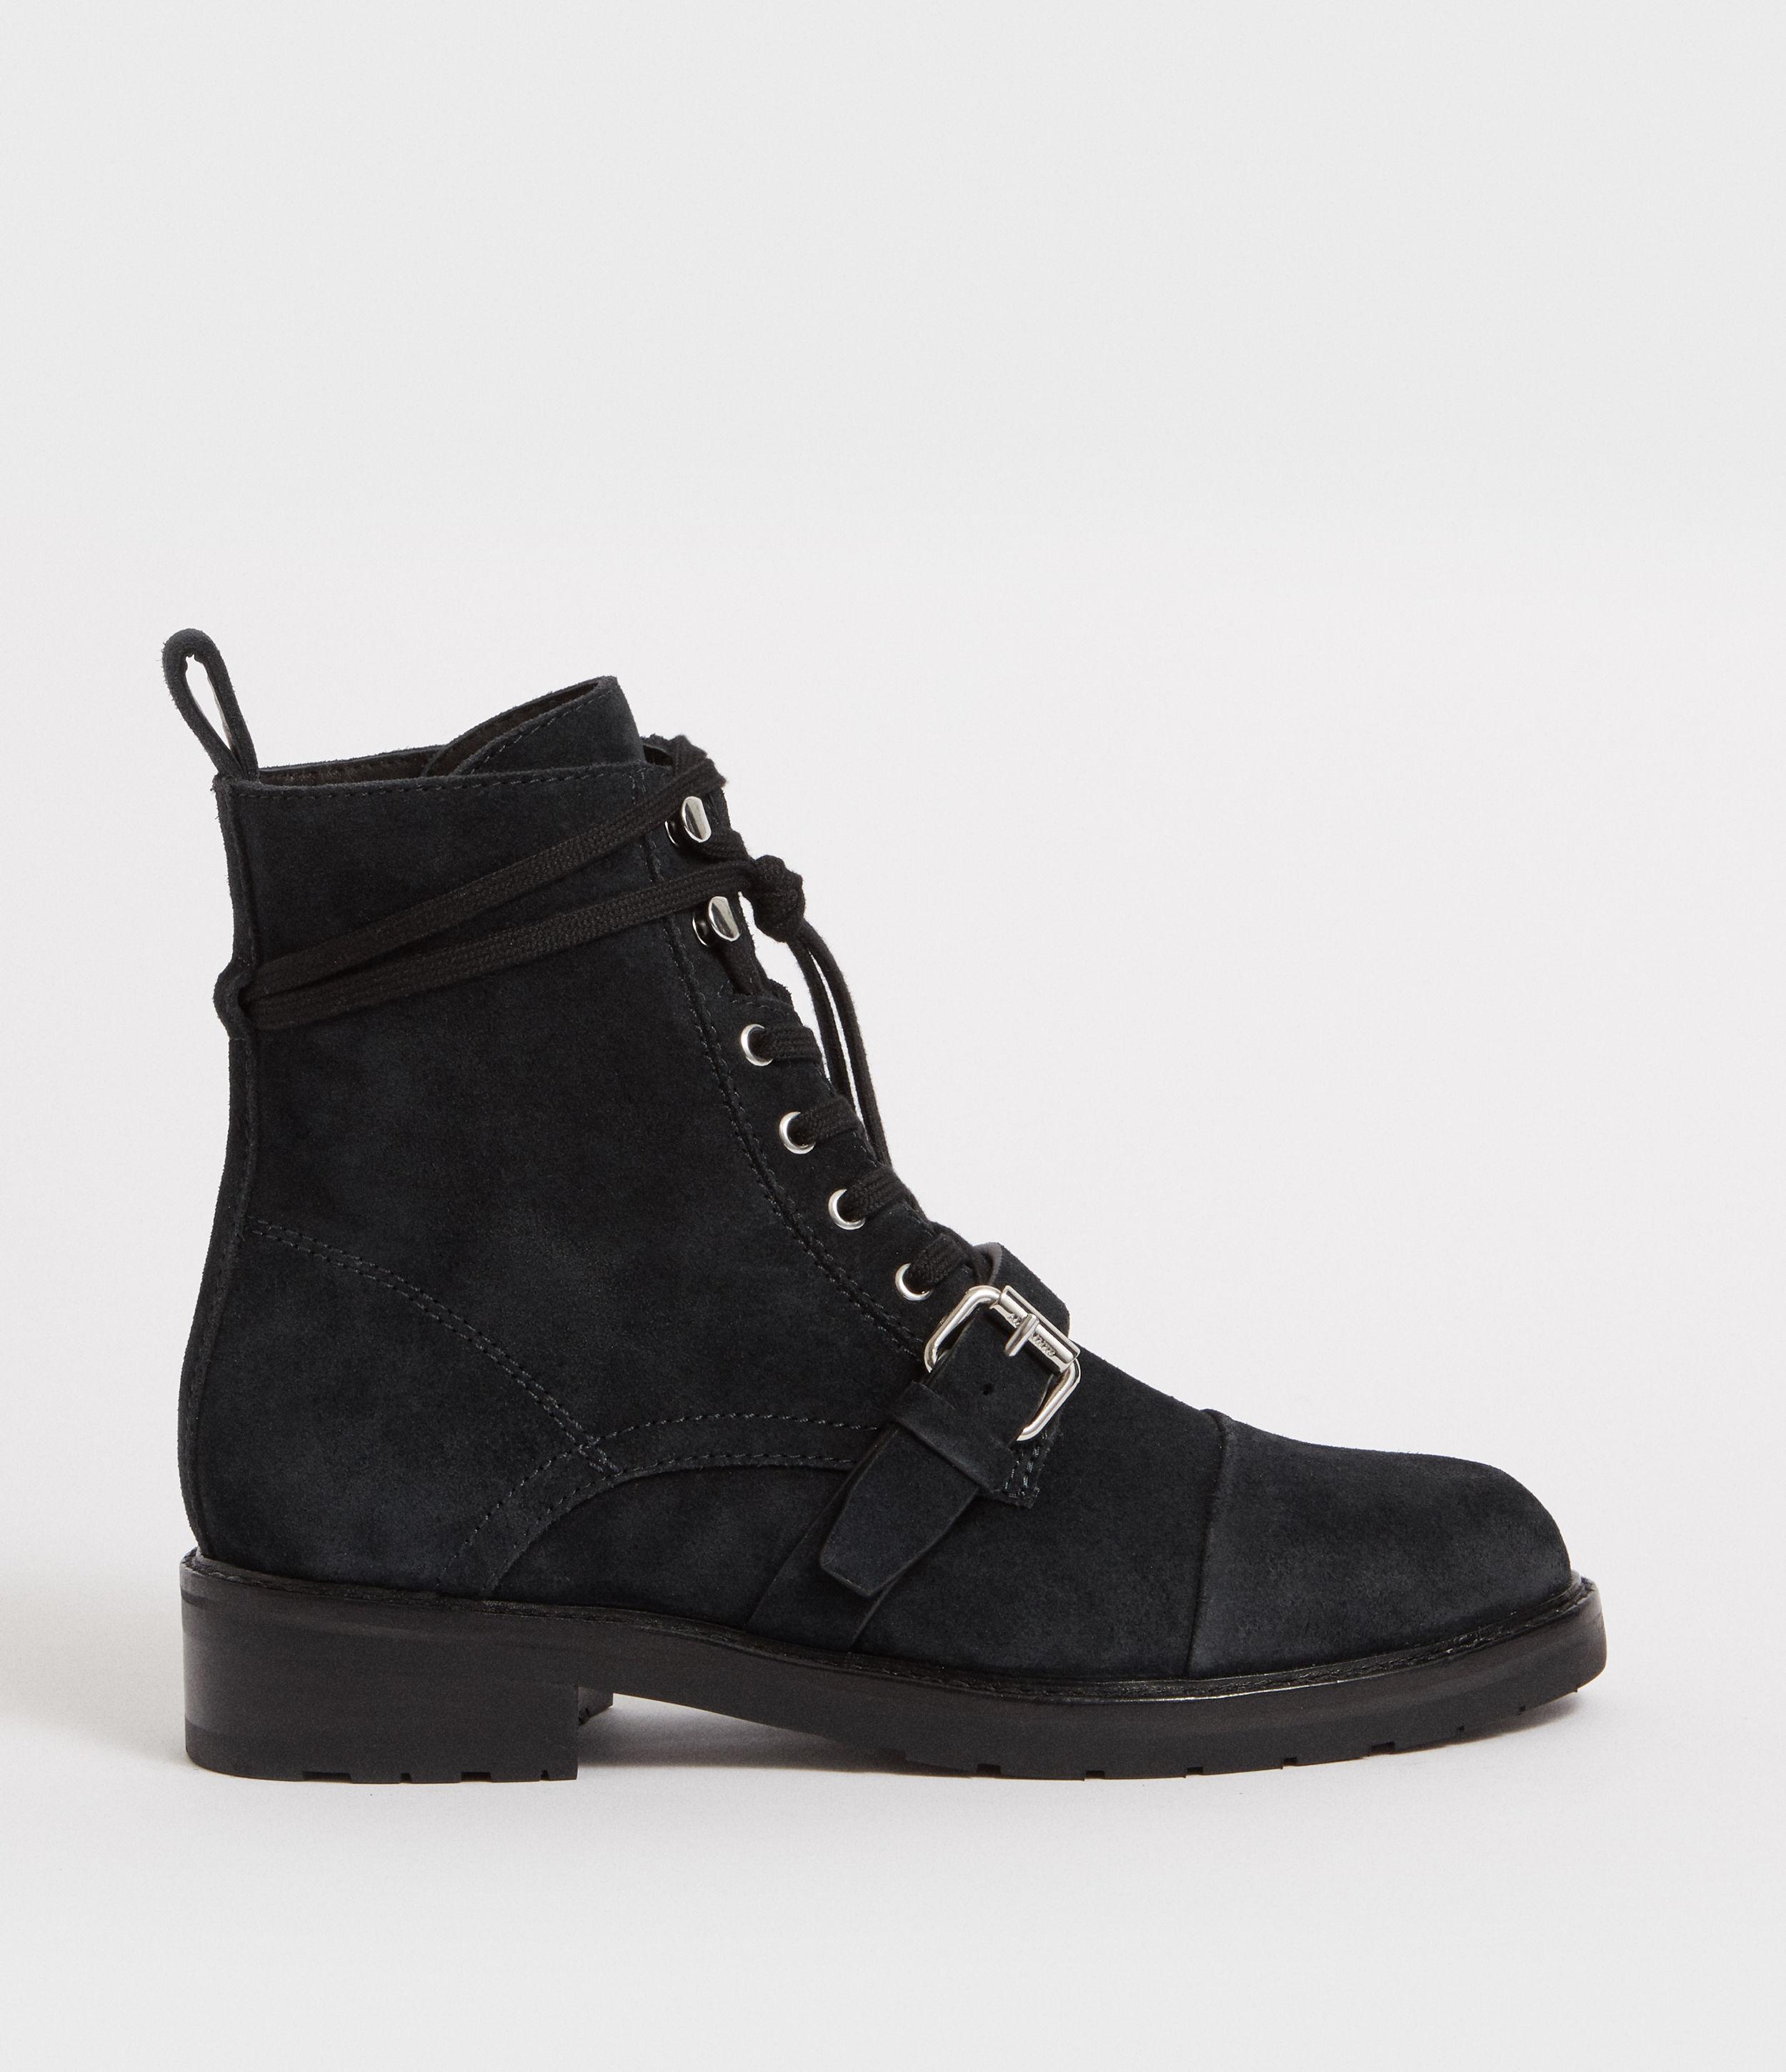 AllSaints Donita Suede Boot in Gray - Lyst